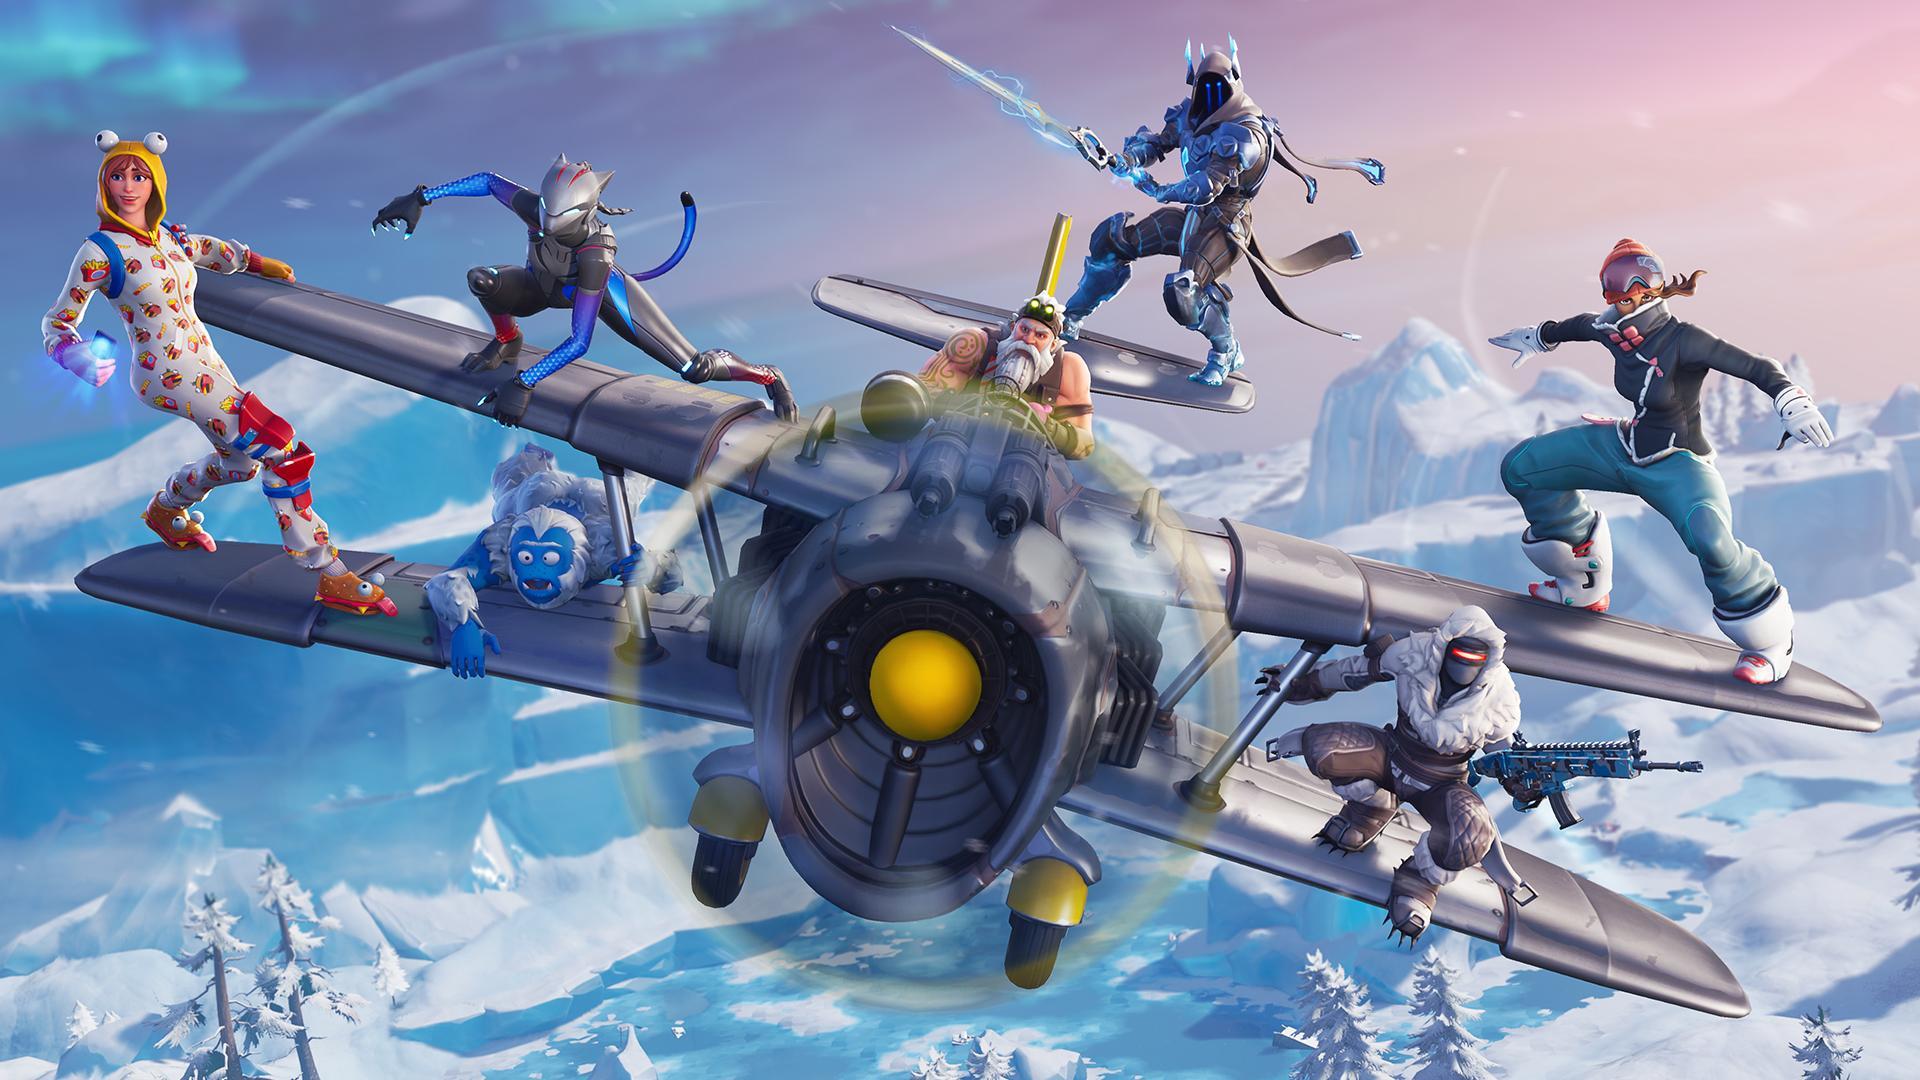 Fortnite Season 7 HD Background is Here Wallpaper and Free